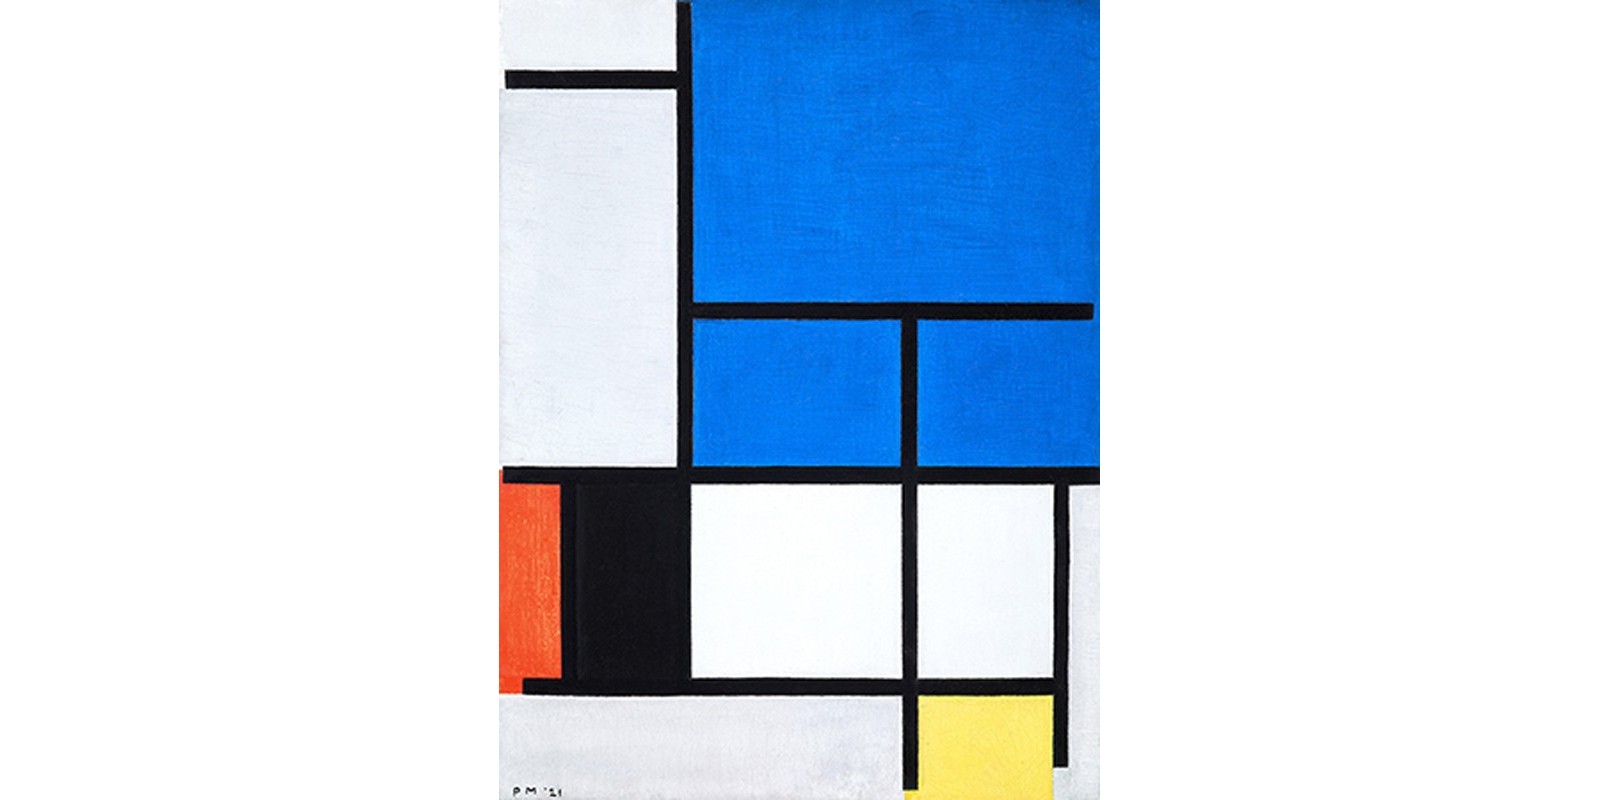 Piet Mondrian - Composition with large blue plane, red, black, yellow, and gray